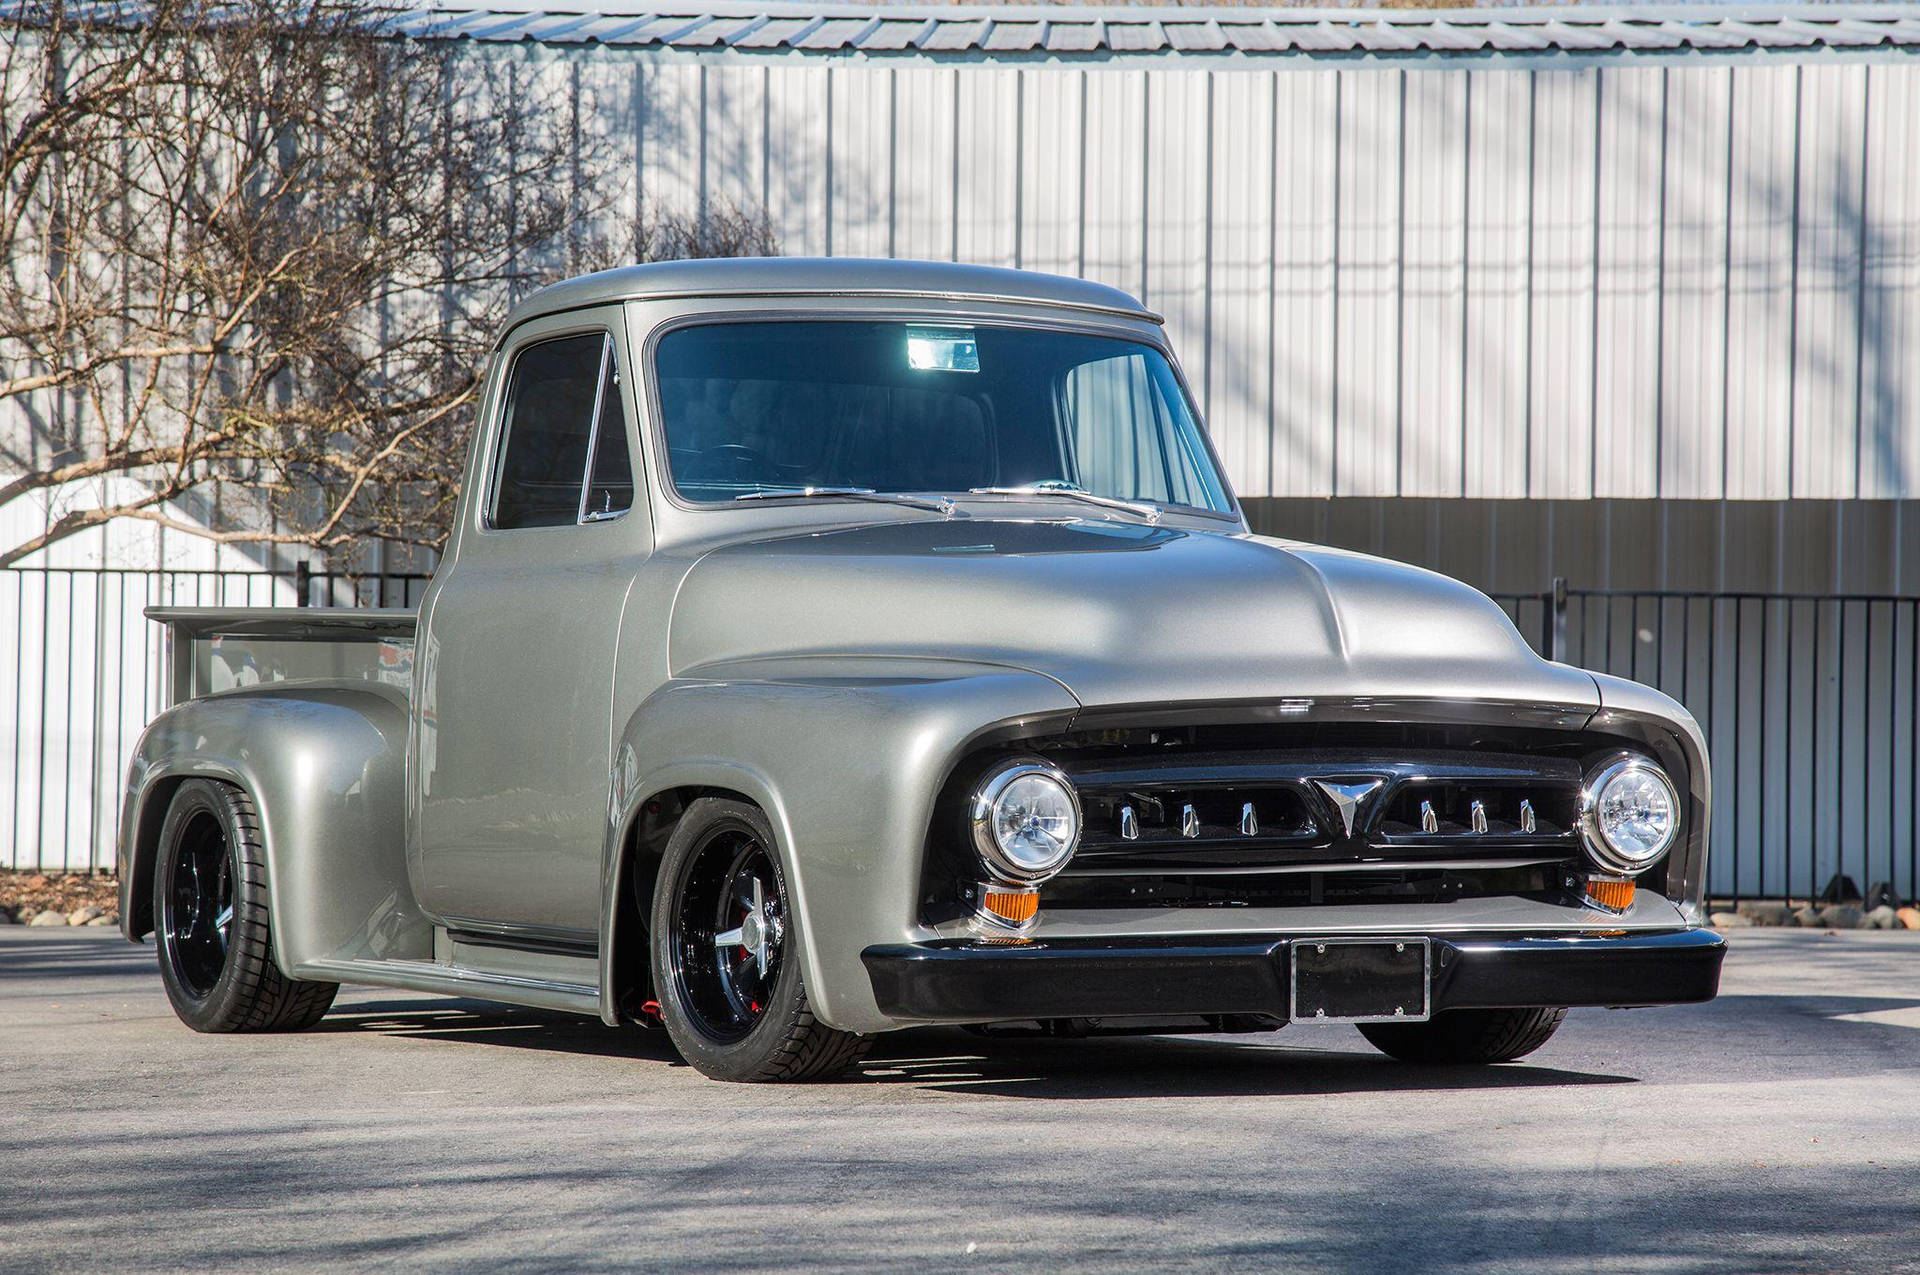 Majestic Glossy Gray Old Ford Truck Background